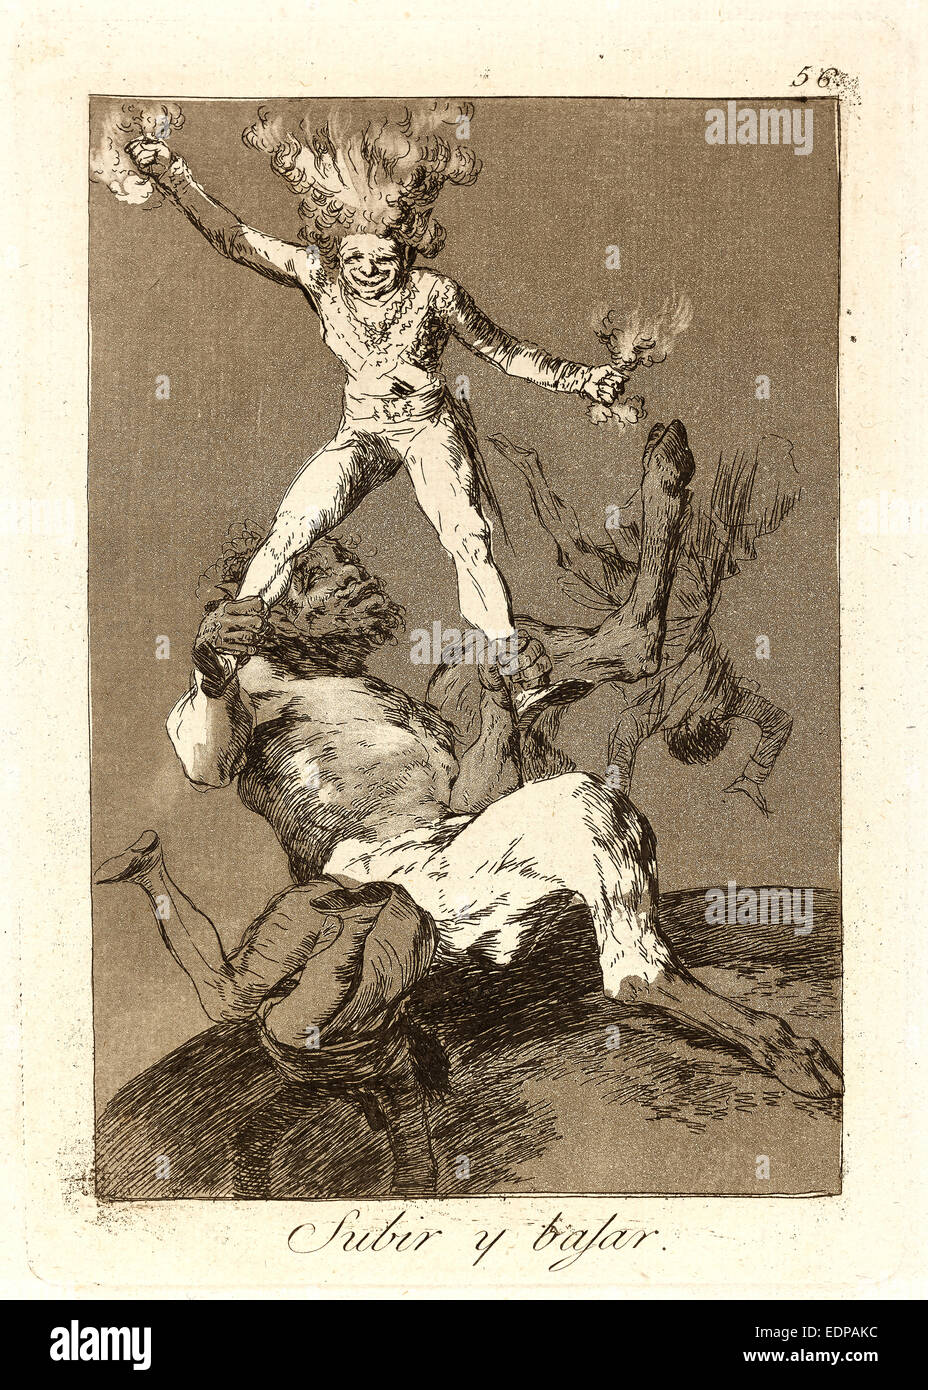 Francisco de Goya (Spanish, 1746-1828). Subir y bajar. (To rise and to fall.), 1796-1797. From Los Caprichos, no. 56. Etching Stock Photo